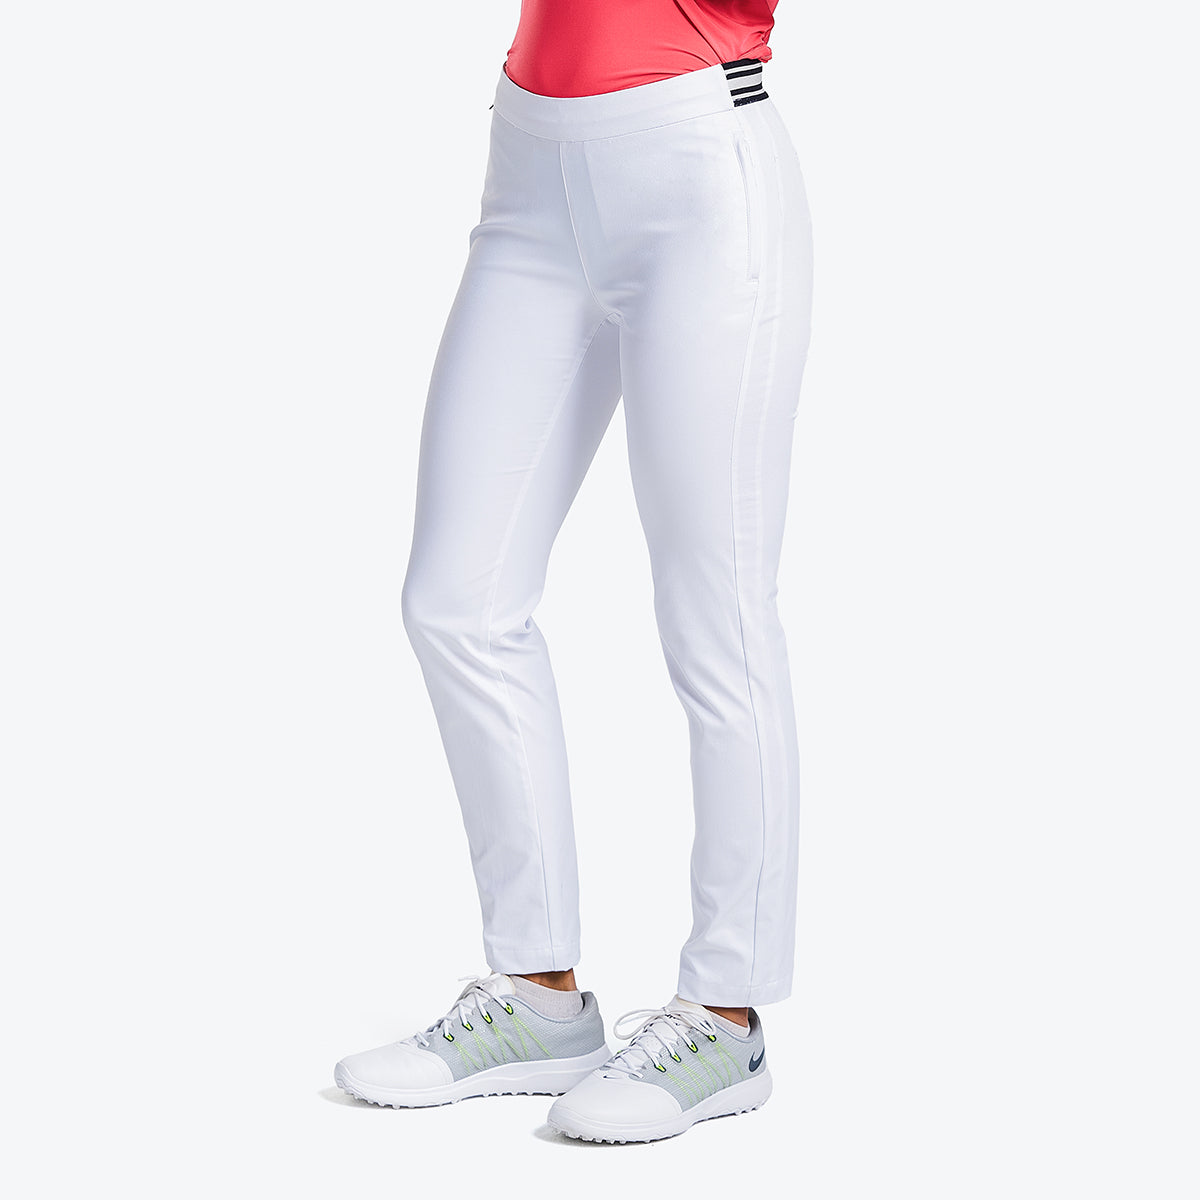 Basille Pants in White